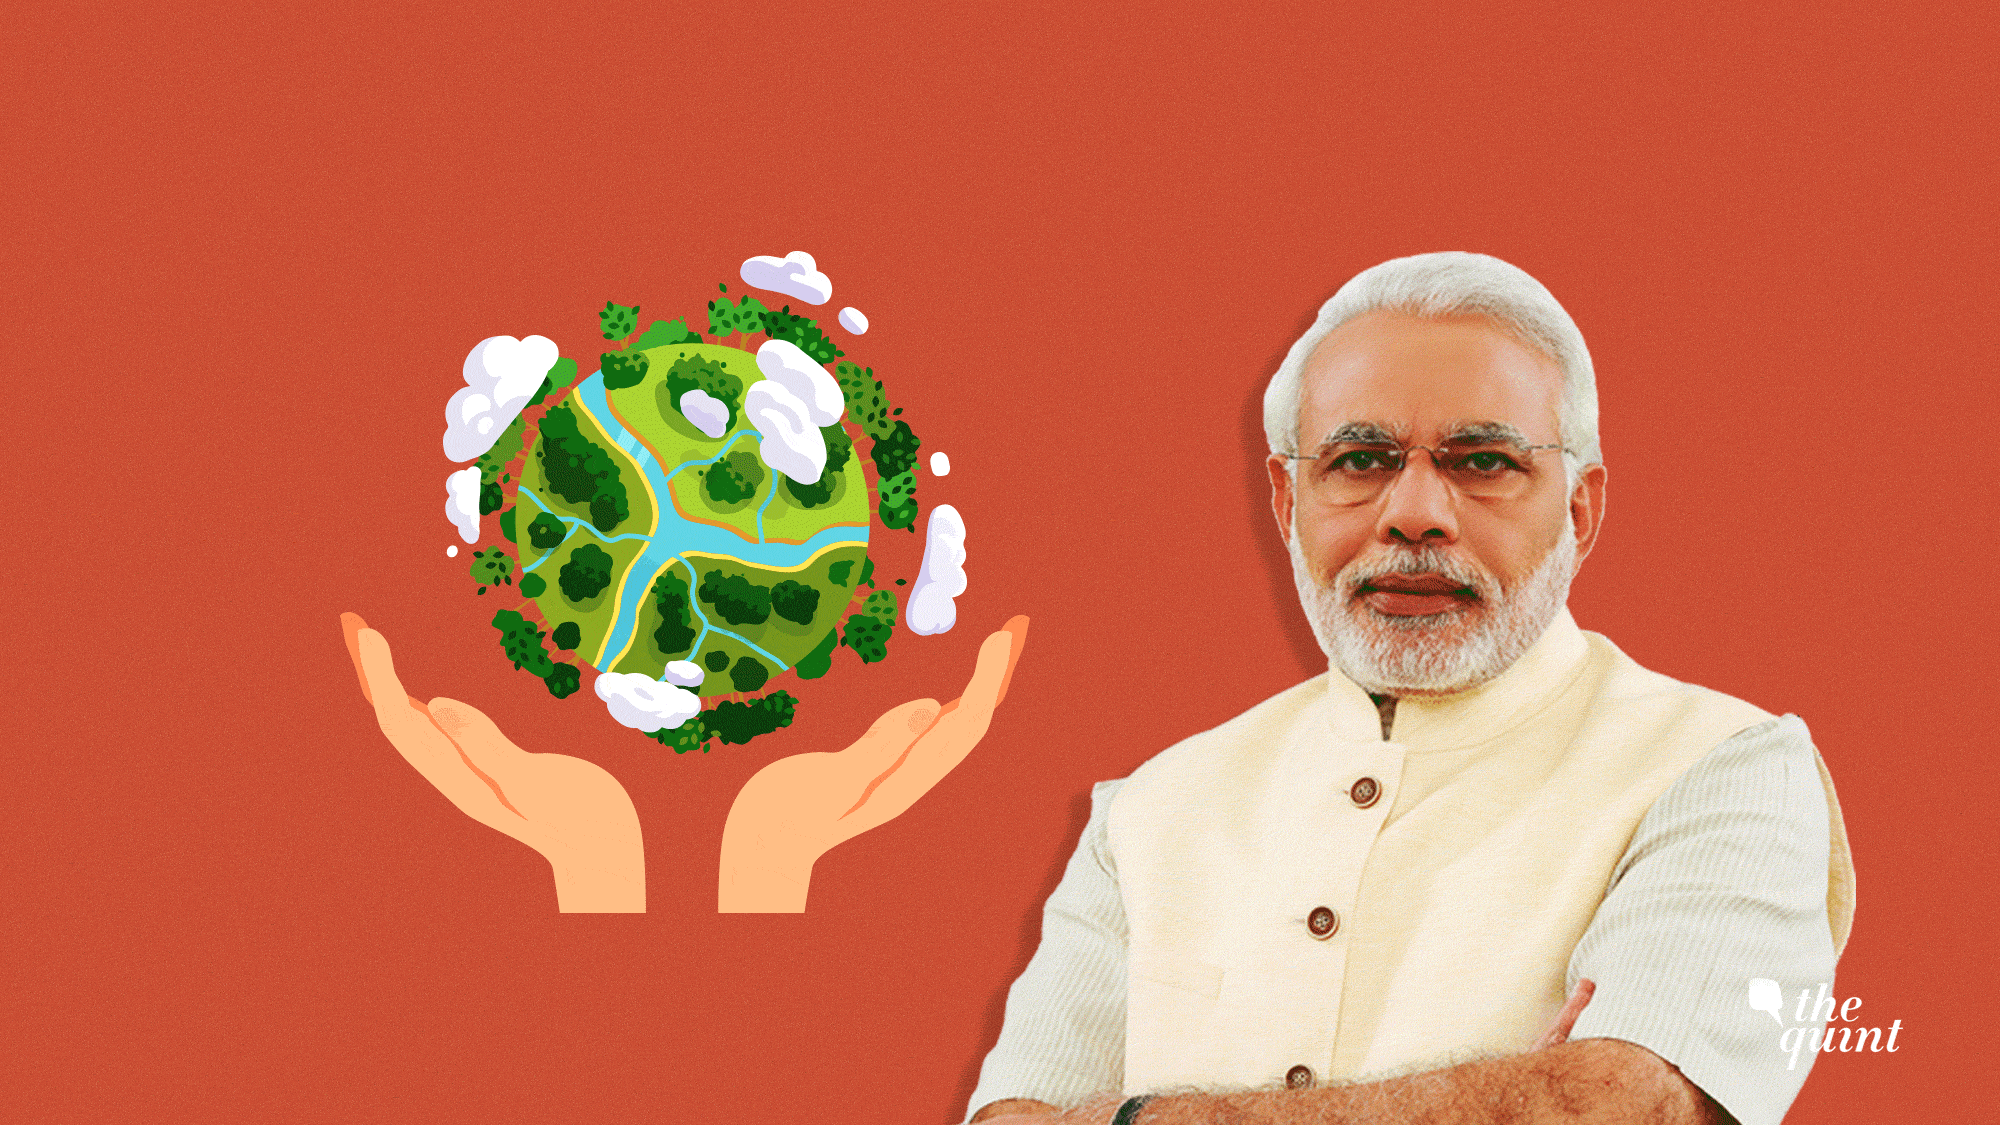 India is among the bottom five countries on the Environmental Performance Index, ranking 177 among 180 countries.